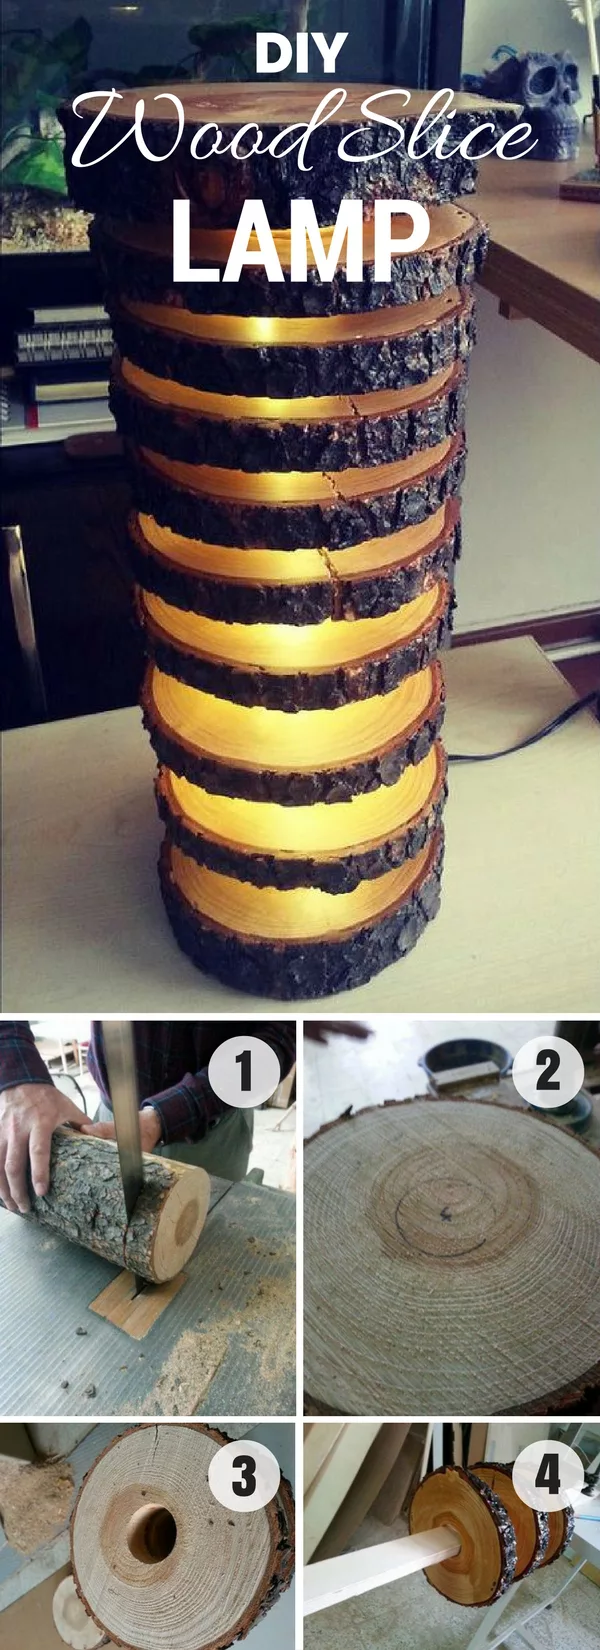 Check out how to build an easy DIY Wood Slice Lamp